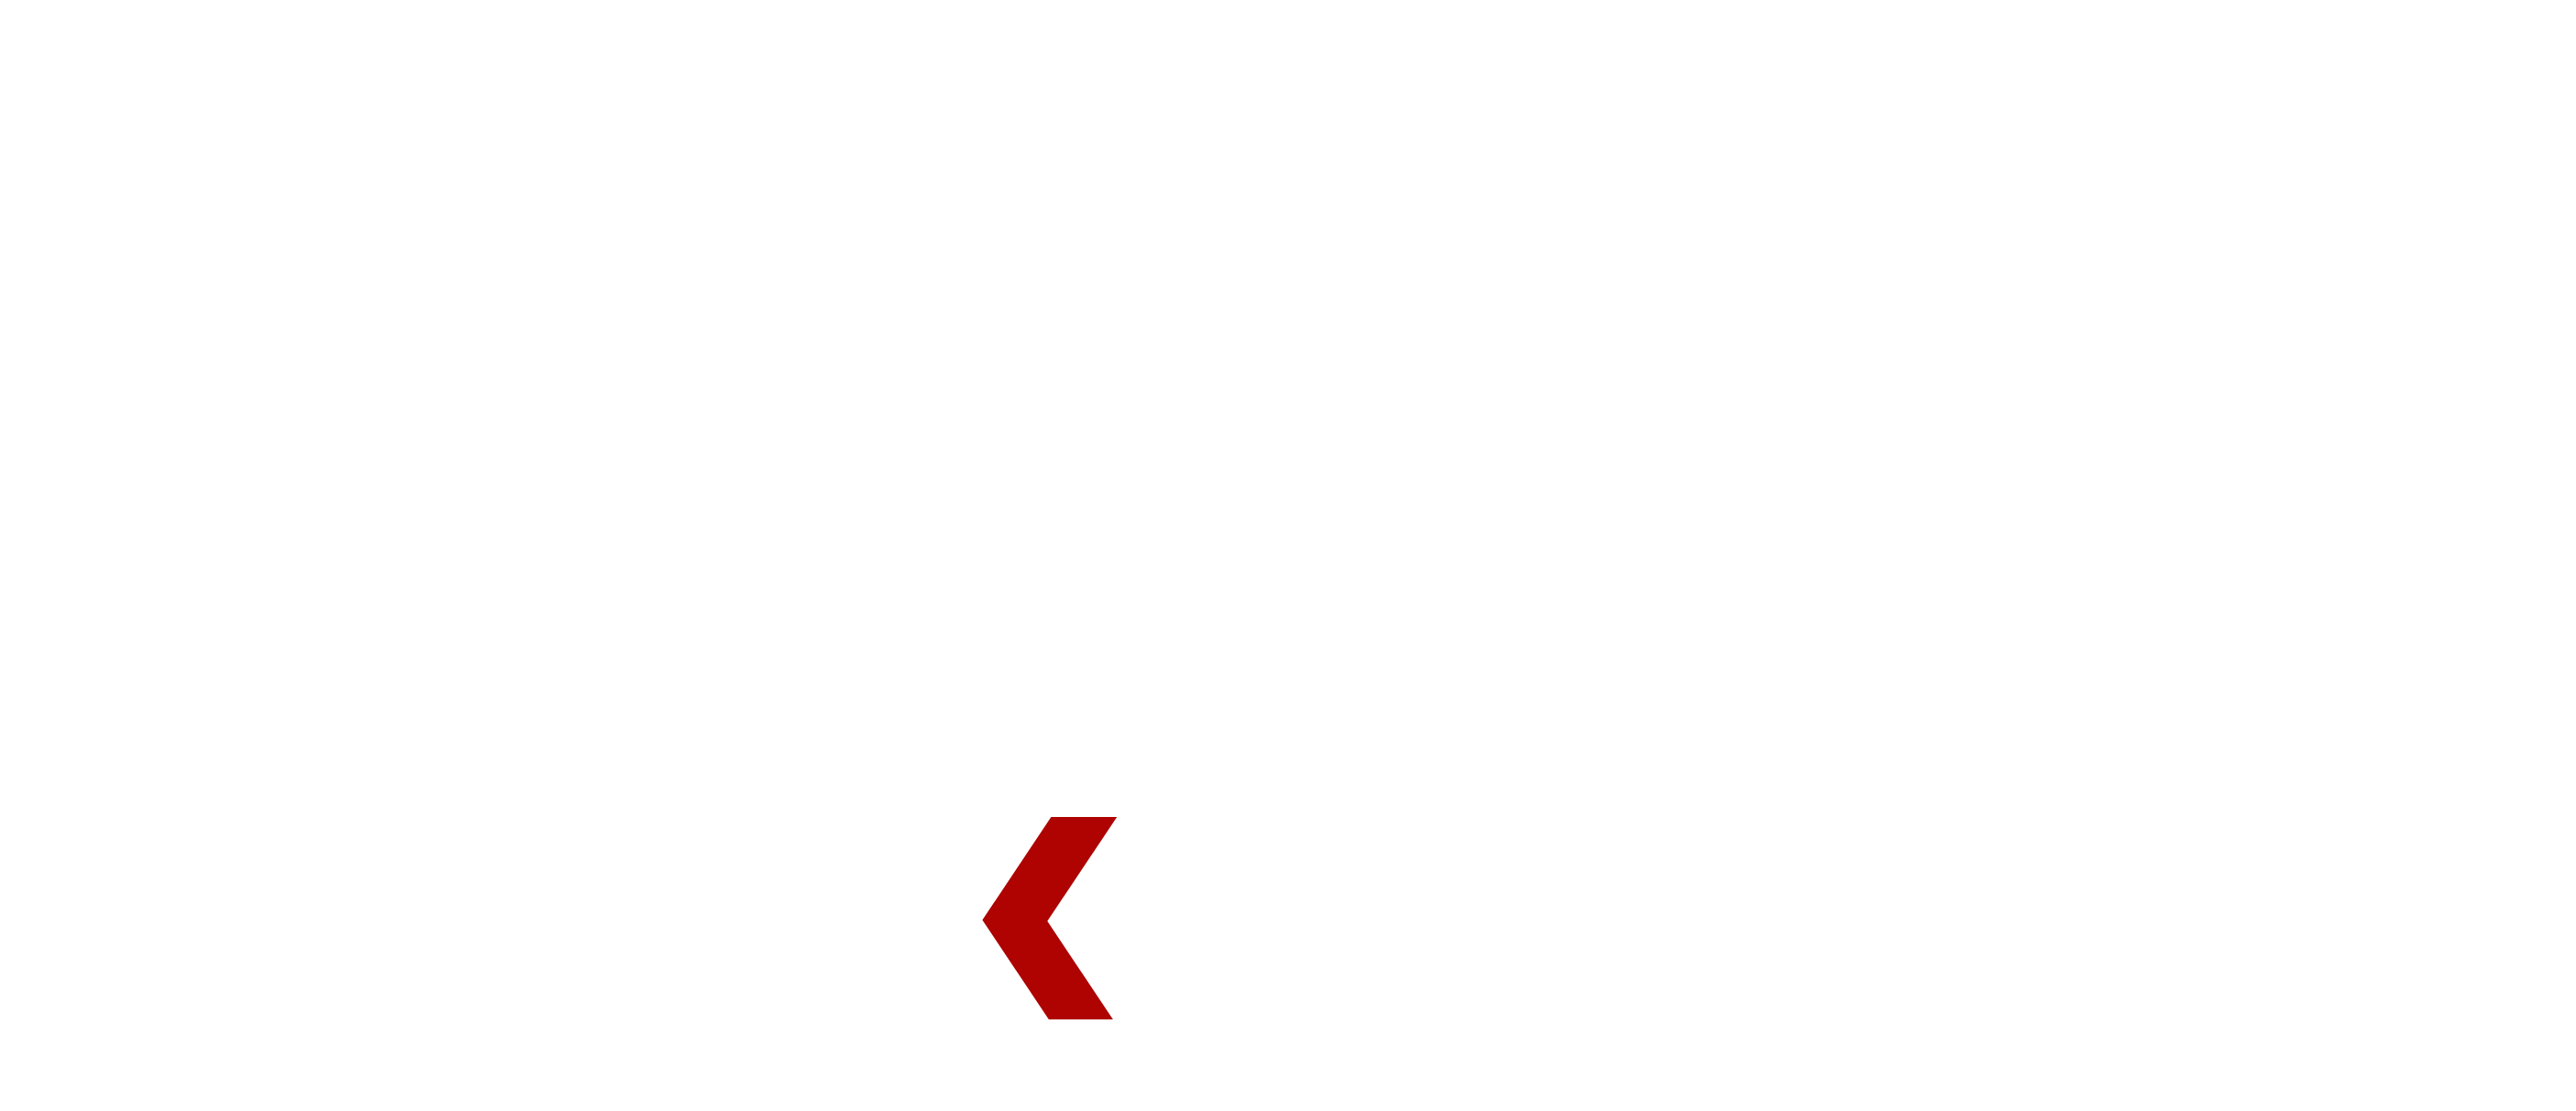 Many a small thing has been made large by the right kind of marketing.